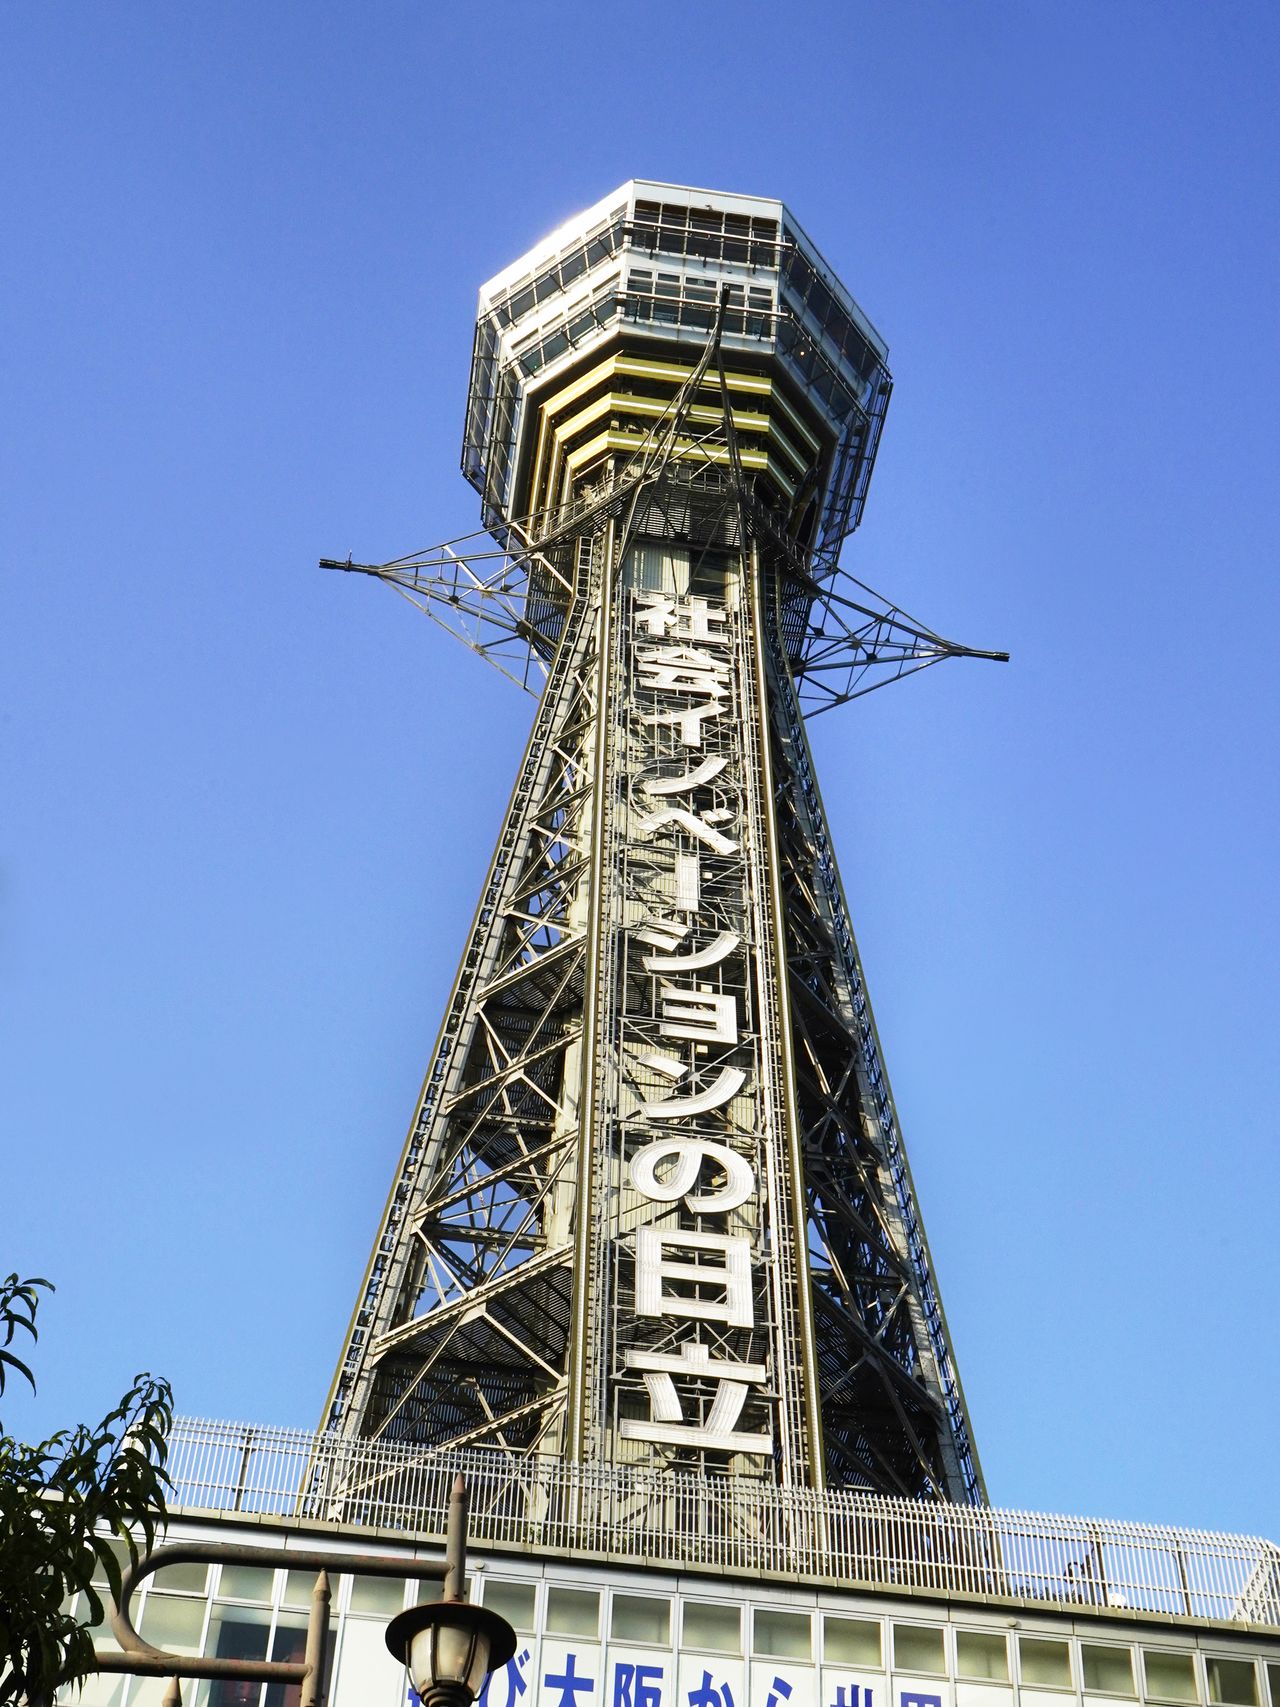 With the Amazing Pass, Tsūtenkaku in Shinsekai is free of charge on weekdays, and there is a discount on both entry to the Tenbō Paradise observation platform and a souvenir photo.